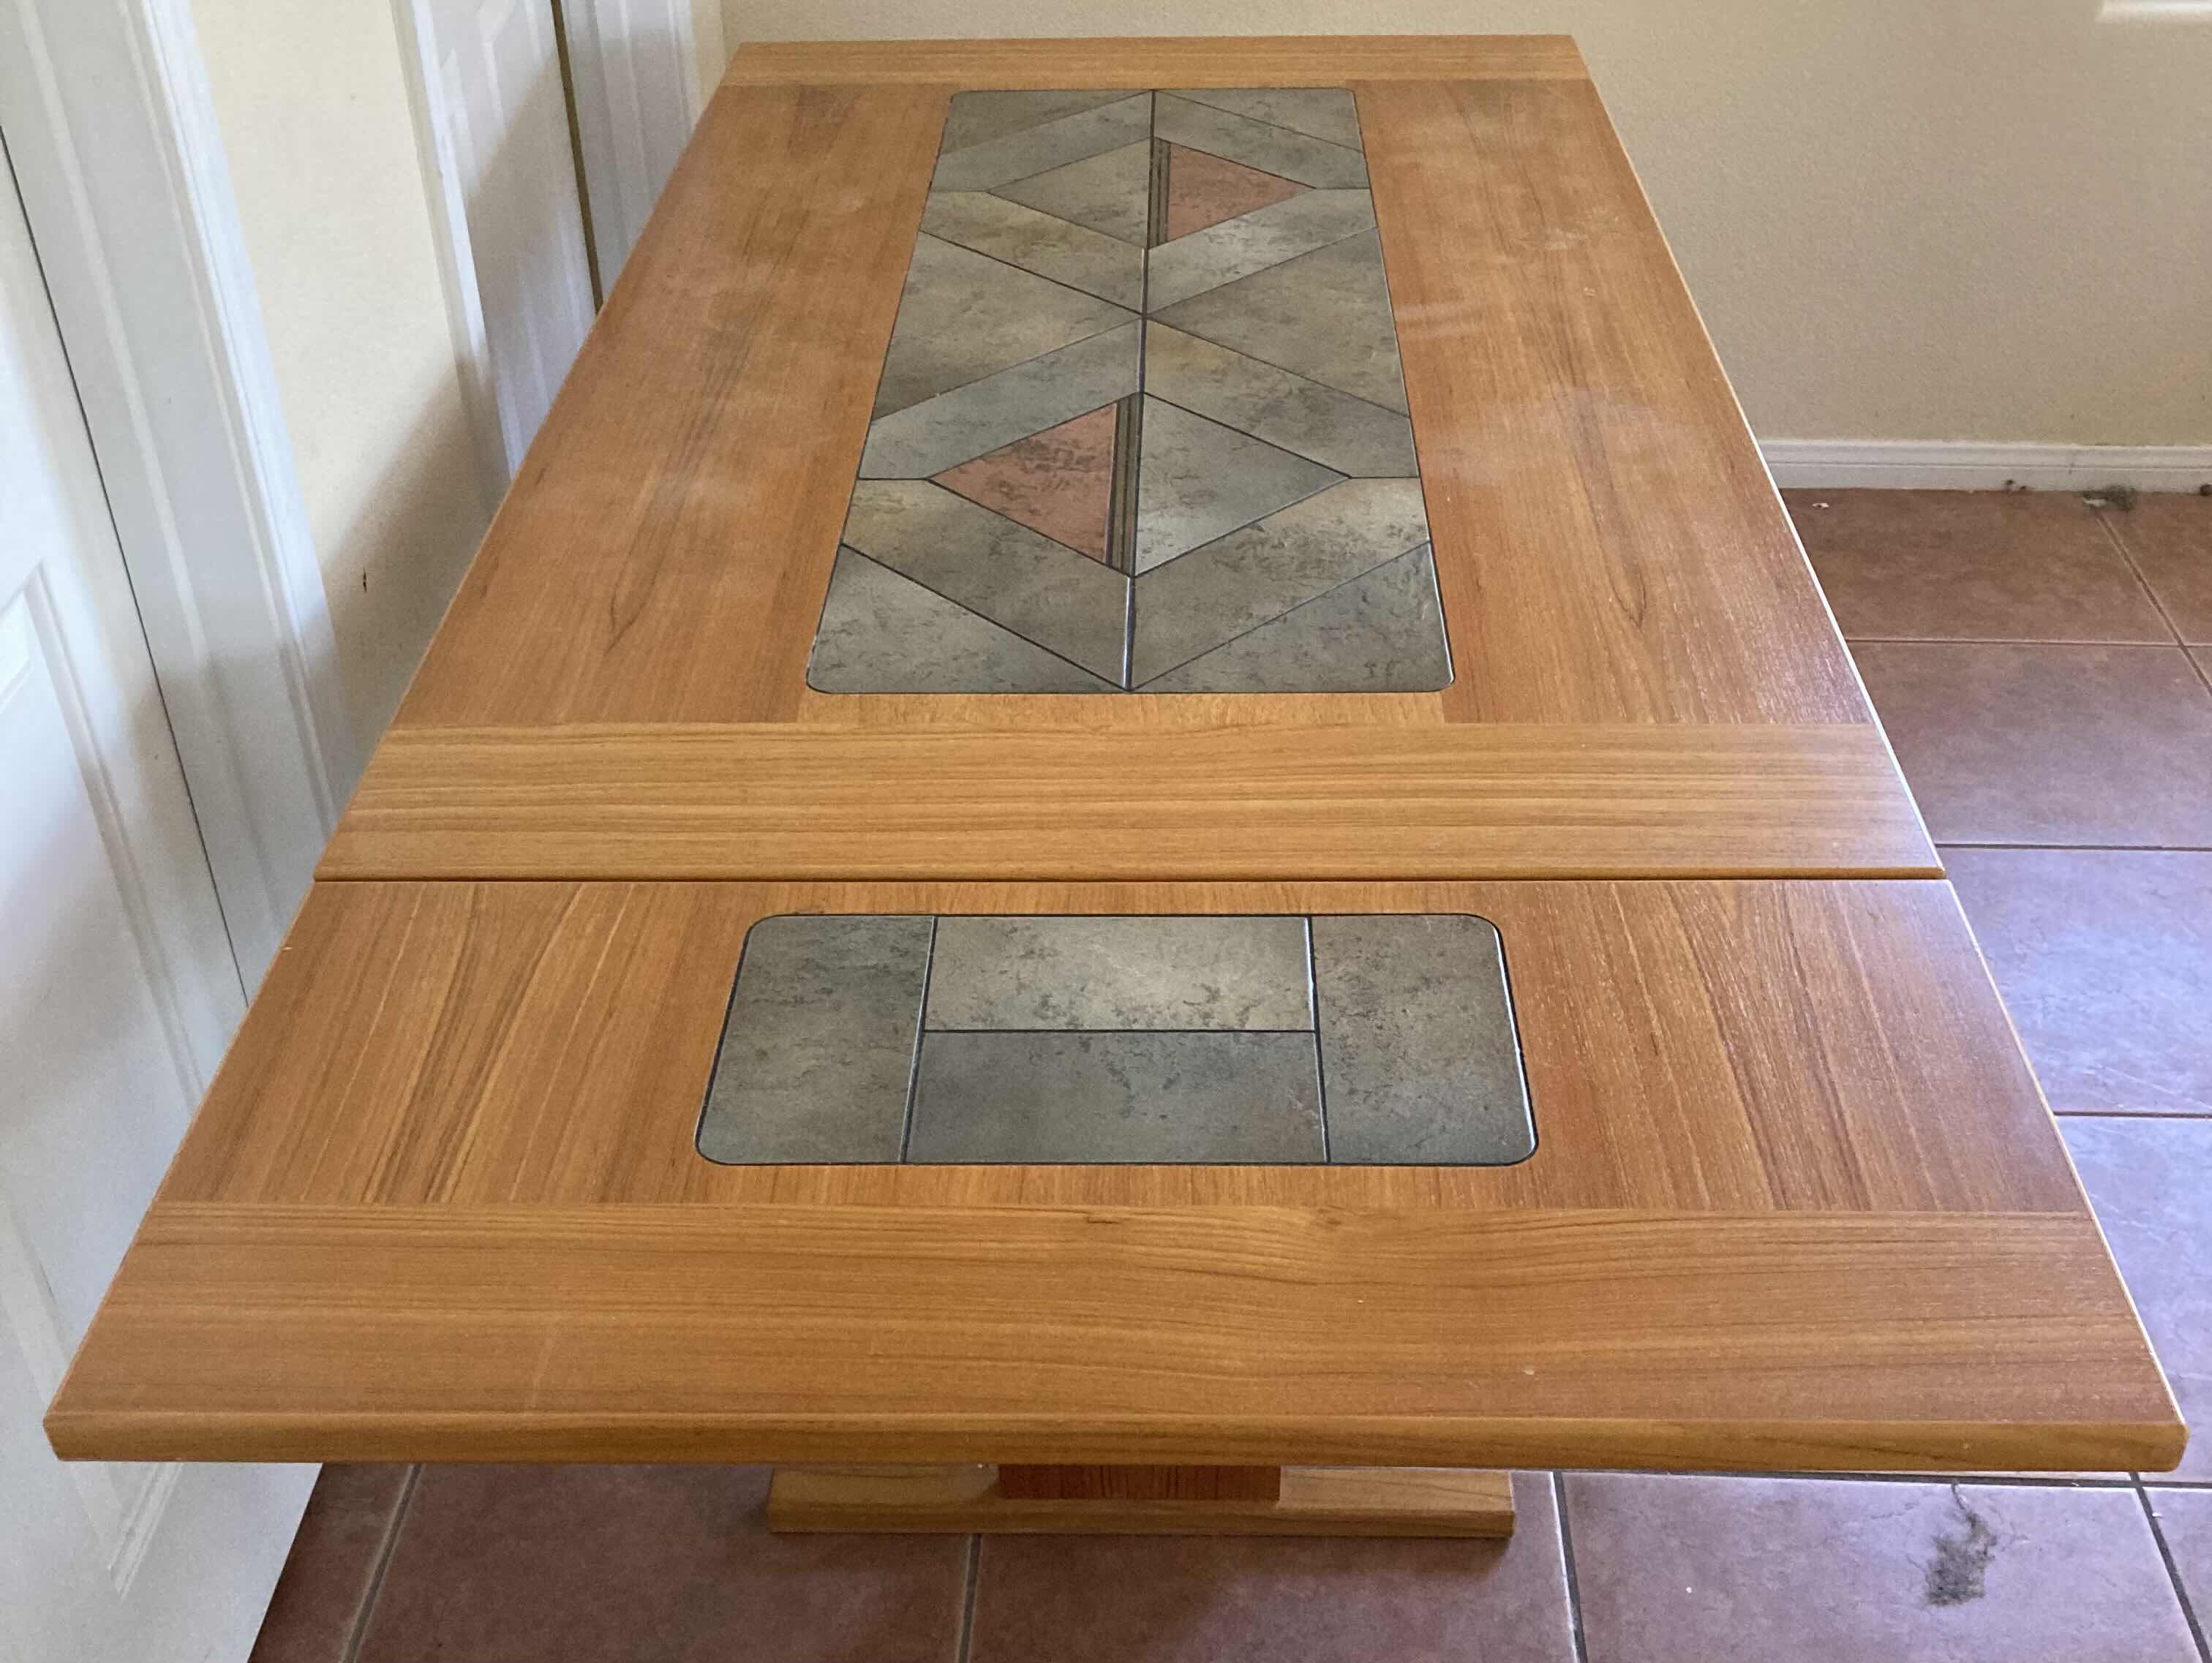 Photo 3 of SOUTHWESTERN STYLE WOOD FINISH DINING TABLE W TILE TOP INLAY 63”-79” X 35.5” H28.5”